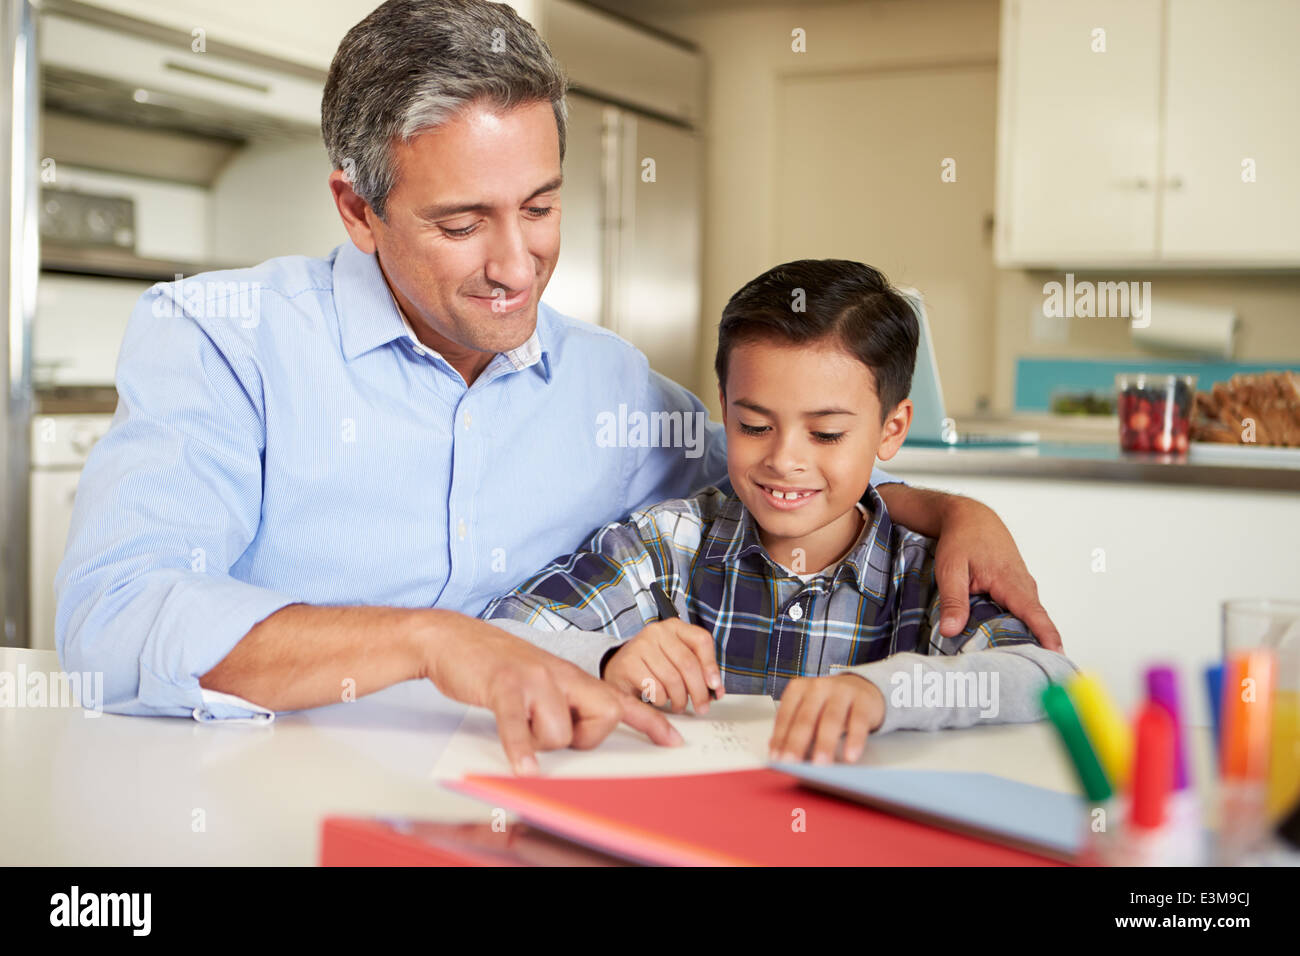 Hispanic Father Helping Son with Homework At Table Banque D'Images